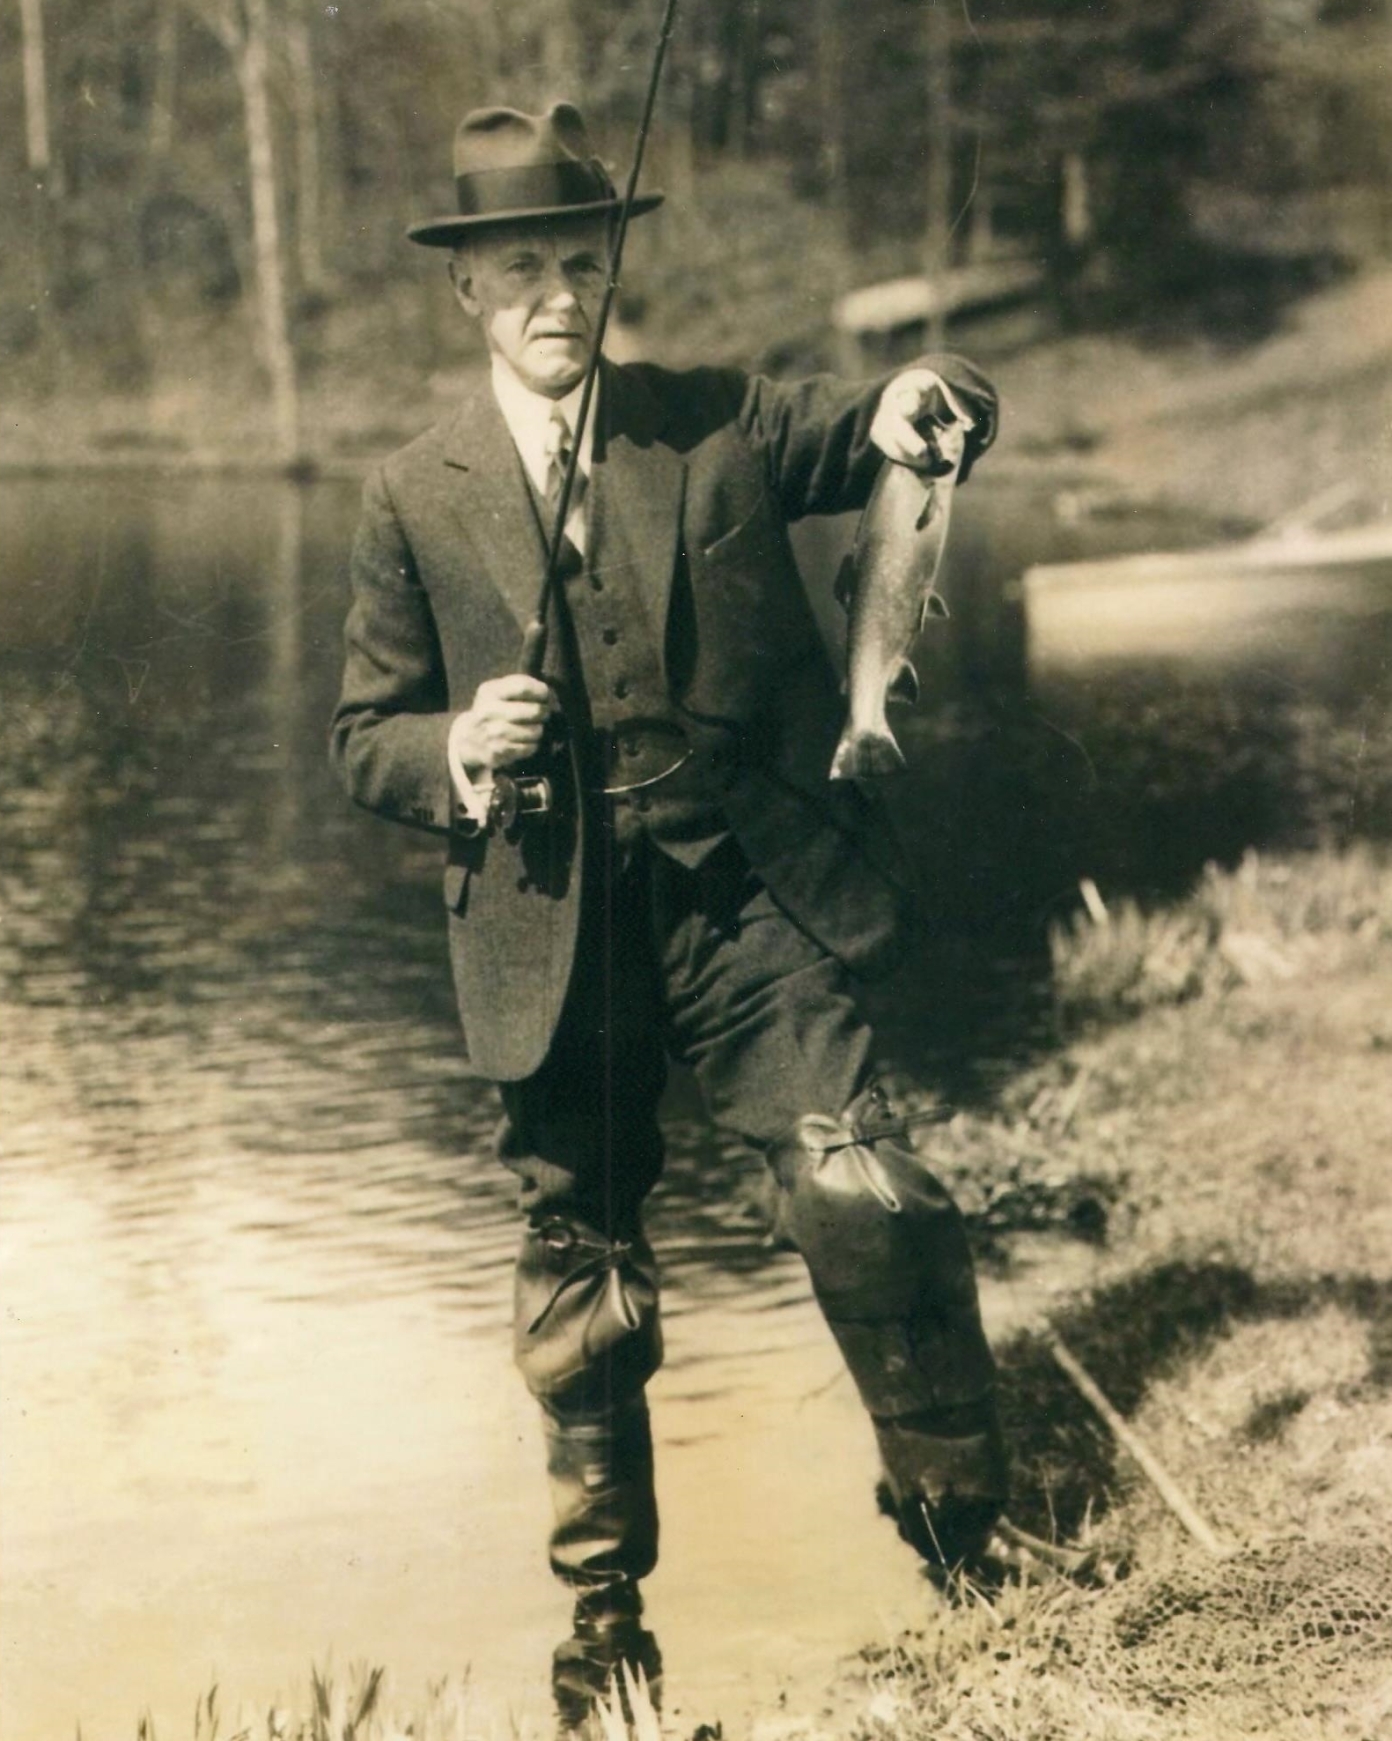 Coolidge held scrupulously to accurate fish stories. He made a point of displaying what he had caught, even documenting it for verification. Here he holds his latest catch up for visual confirmation. 